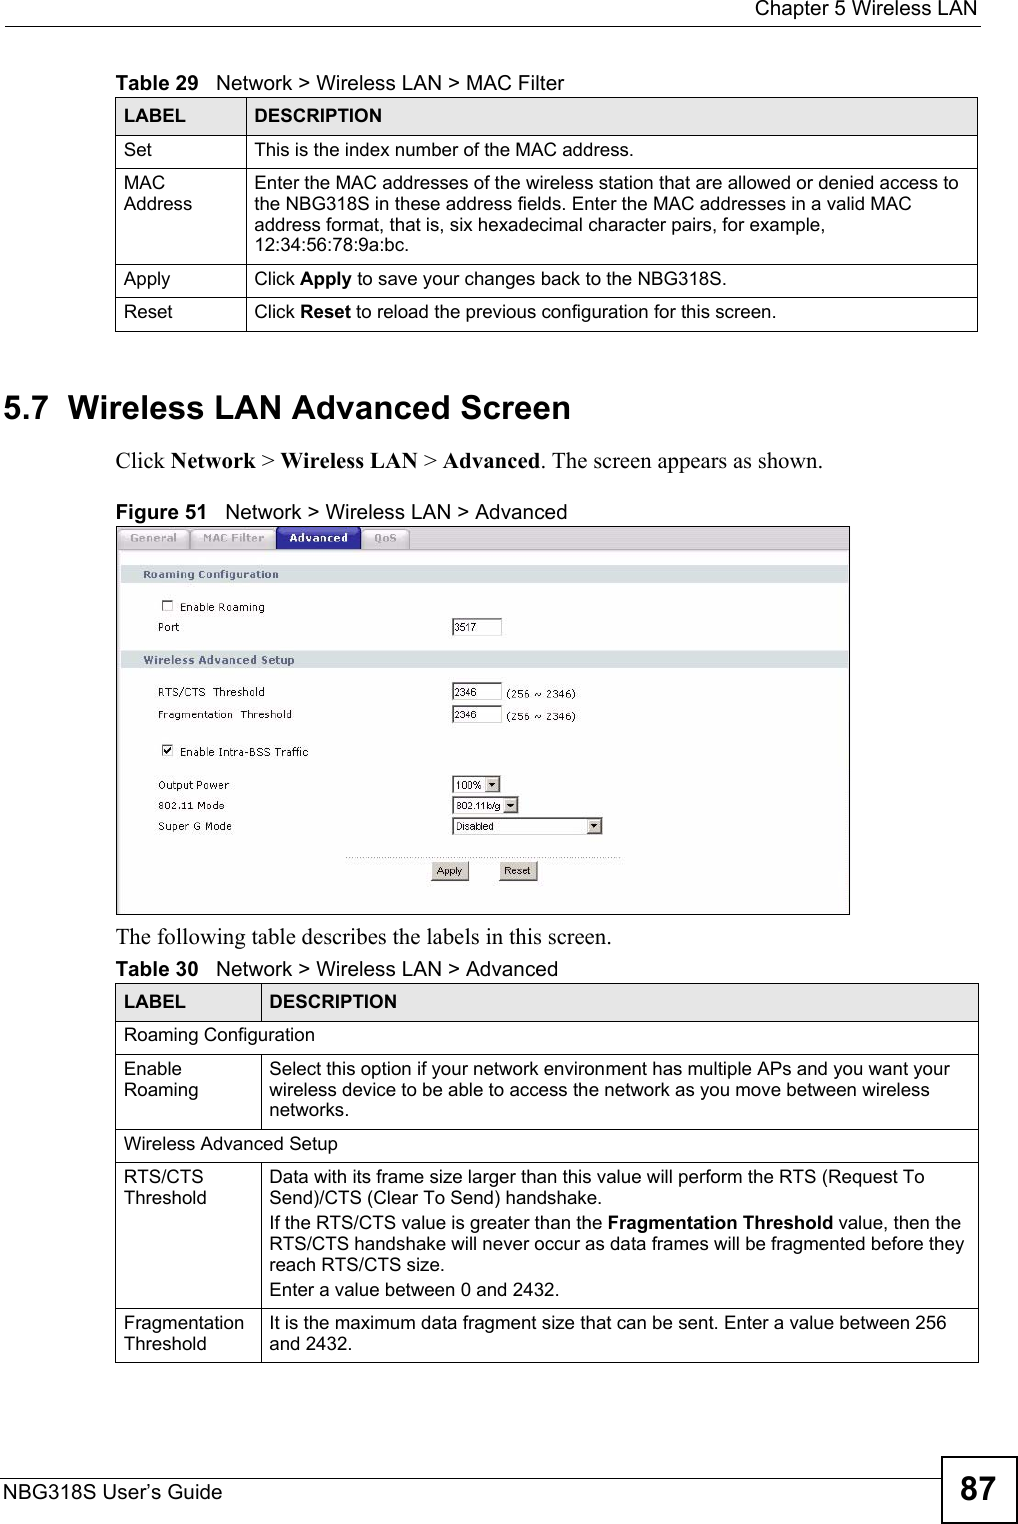  Chapter 5 Wireless LANNBG318S User’s Guide 875.7  Wireless LAN Advanced ScreenClick Network &gt; Wireless LAN &gt; Advanced. The screen appears as shown.Figure 51   Network &gt; Wireless LAN &gt; AdvancedThe following table describes the labels in this screen. Set This is the index number of the MAC address.MAC AddressEnter the MAC addresses of the wireless station that are allowed or denied access to the NBG318S in these address fields. Enter the MAC addresses in a valid MAC address format, that is, six hexadecimal character pairs, for example, 12:34:56:78:9a:bc.Apply Click Apply to save your changes back to the NBG318S.Reset Click Reset to reload the previous configuration for this screen.Table 29   Network &gt; Wireless LAN &gt; MAC FilterLABEL DESCRIPTIONTable 30   Network &gt; Wireless LAN &gt; AdvancedLABEL DESCRIPTIONRoaming ConfigurationEnable RoamingSelect this option if your network environment has multiple APs and you want your wireless device to be able to access the network as you move between wireless networks.Wireless Advanced SetupRTS/CTS ThresholdData with its frame size larger than this value will perform the RTS (Request To Send)/CTS (Clear To Send) handshake. If the RTS/CTS value is greater than the Fragmentation Threshold value, then the RTS/CTS handshake will never occur as data frames will be fragmented before they reach RTS/CTS size.Enter a value between 0 and 2432. Fragmentation ThresholdIt is the maximum data fragment size that can be sent. Enter a value between 256 and 2432. 